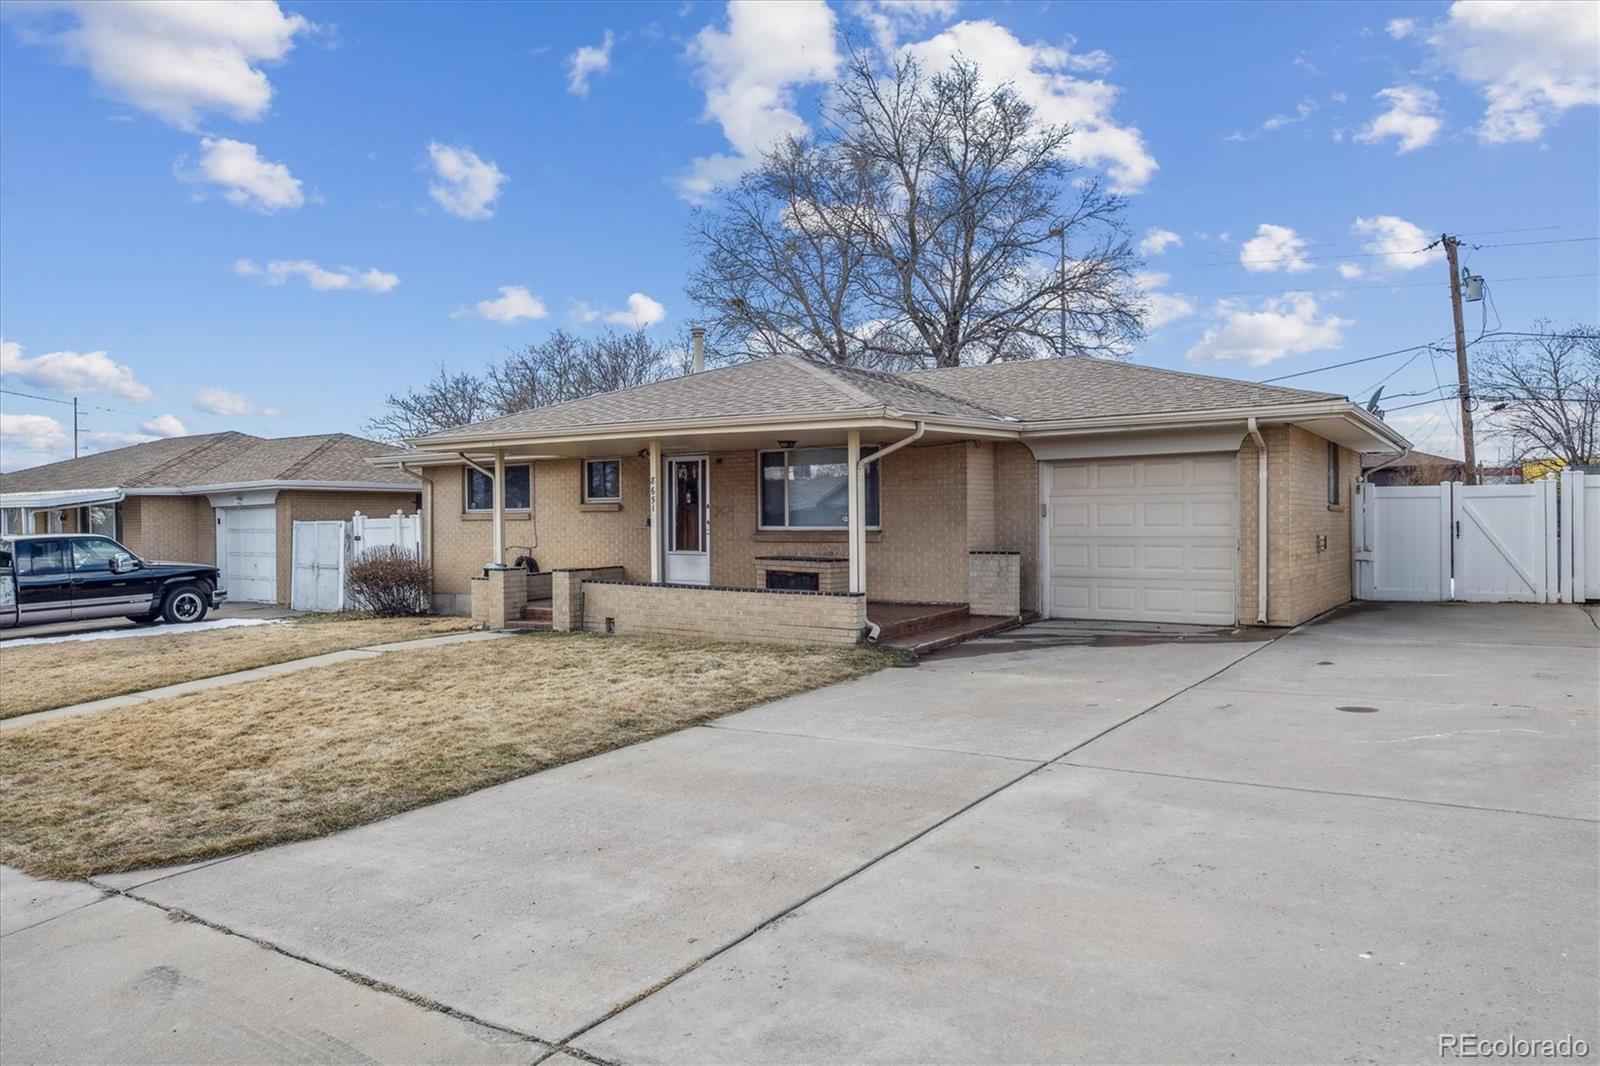 8651  emerson court, Denver sold home. Closed on 2024-04-15 for $440,000.